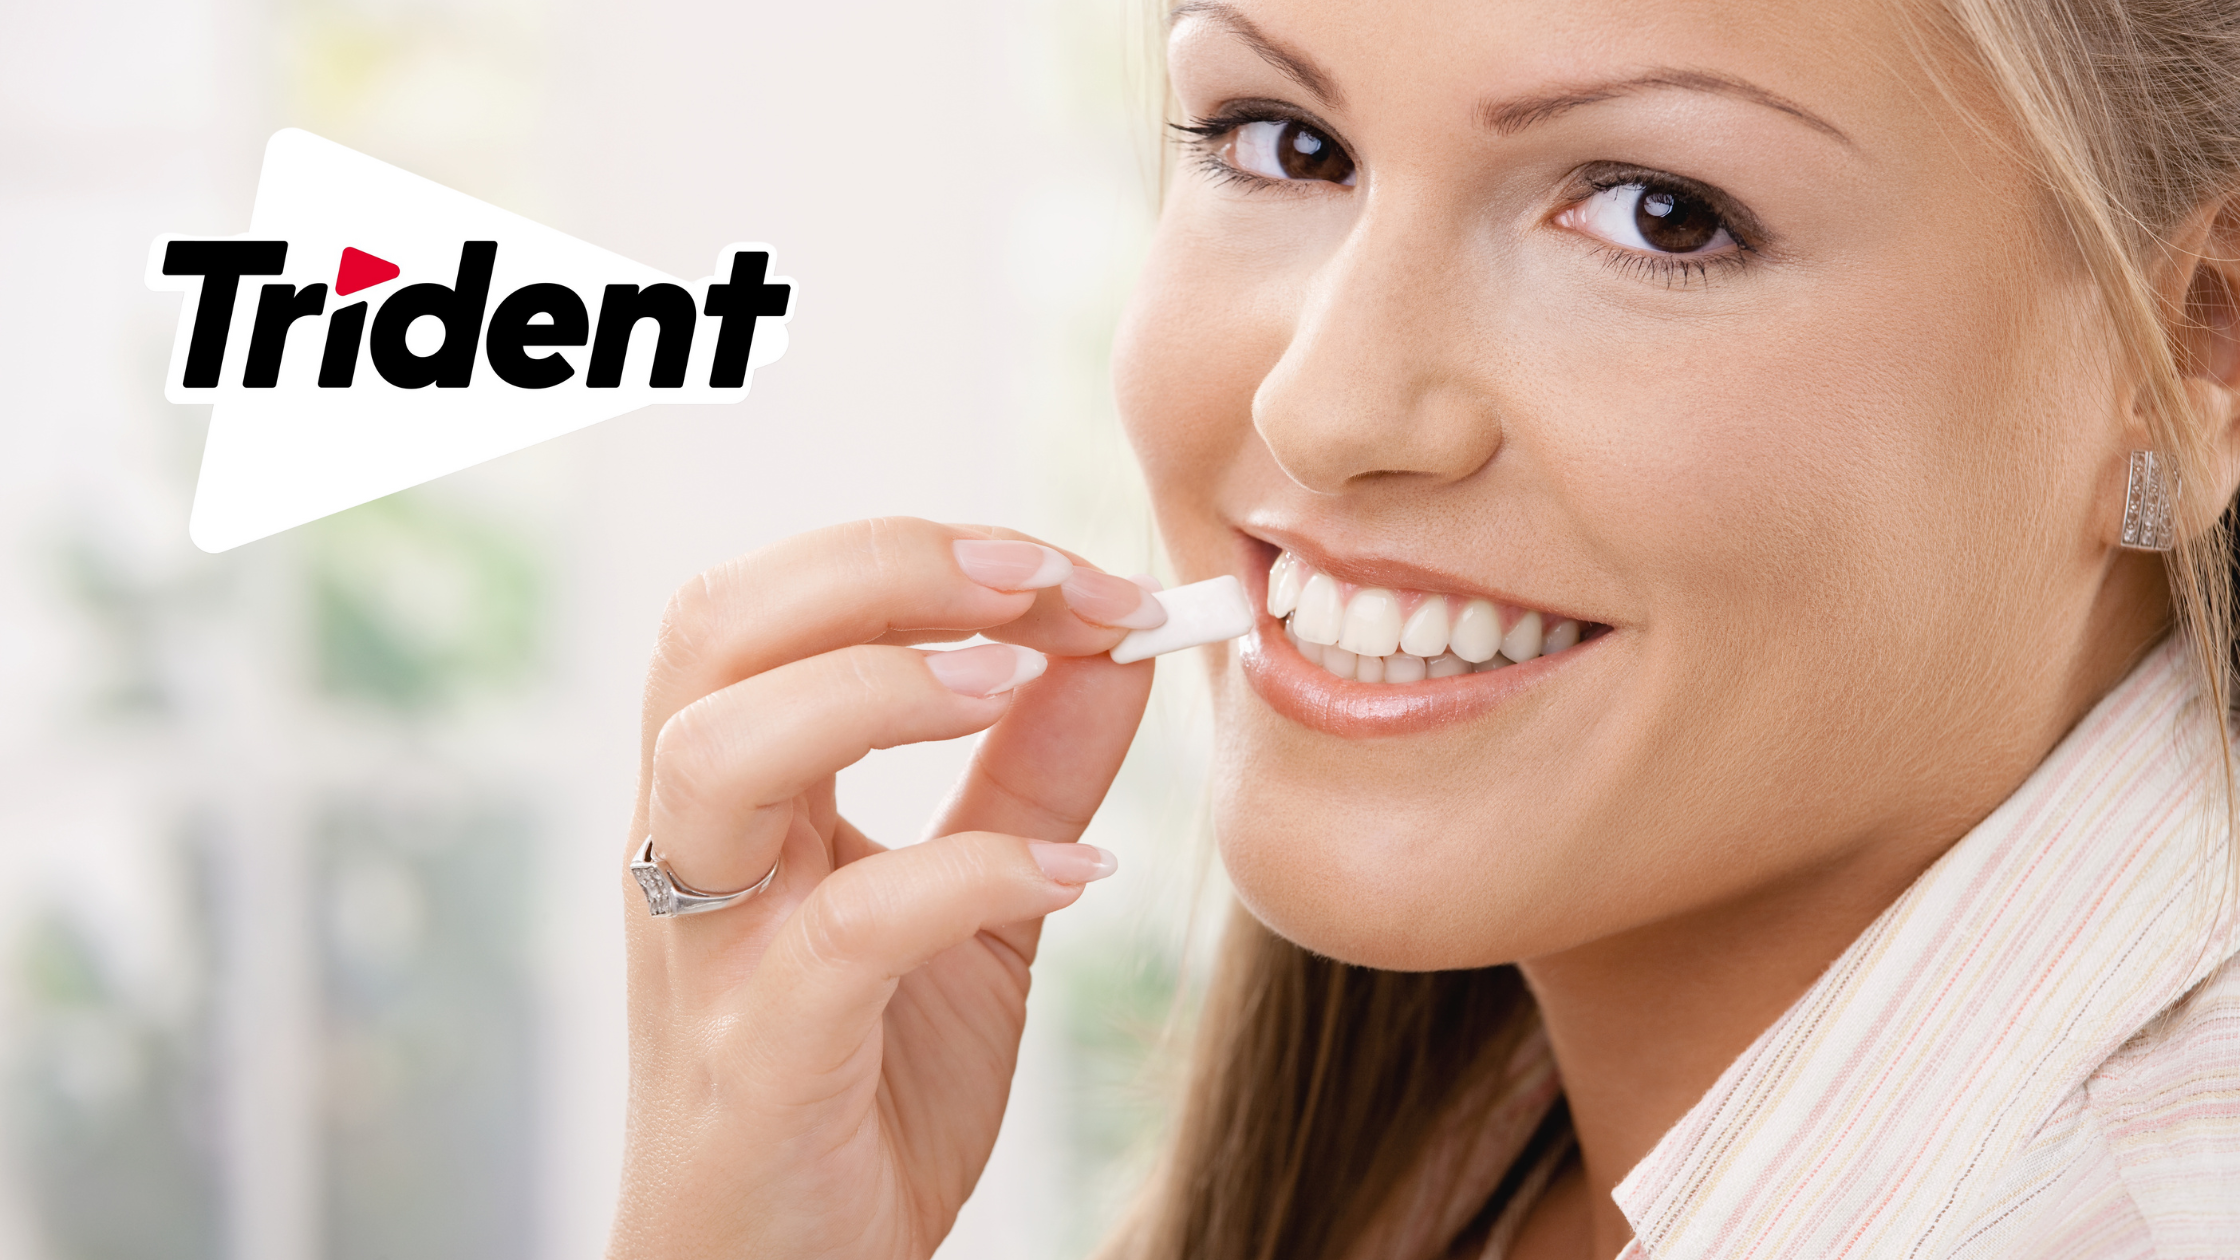 Discover and Try All the Latest Trident Gum Flavors